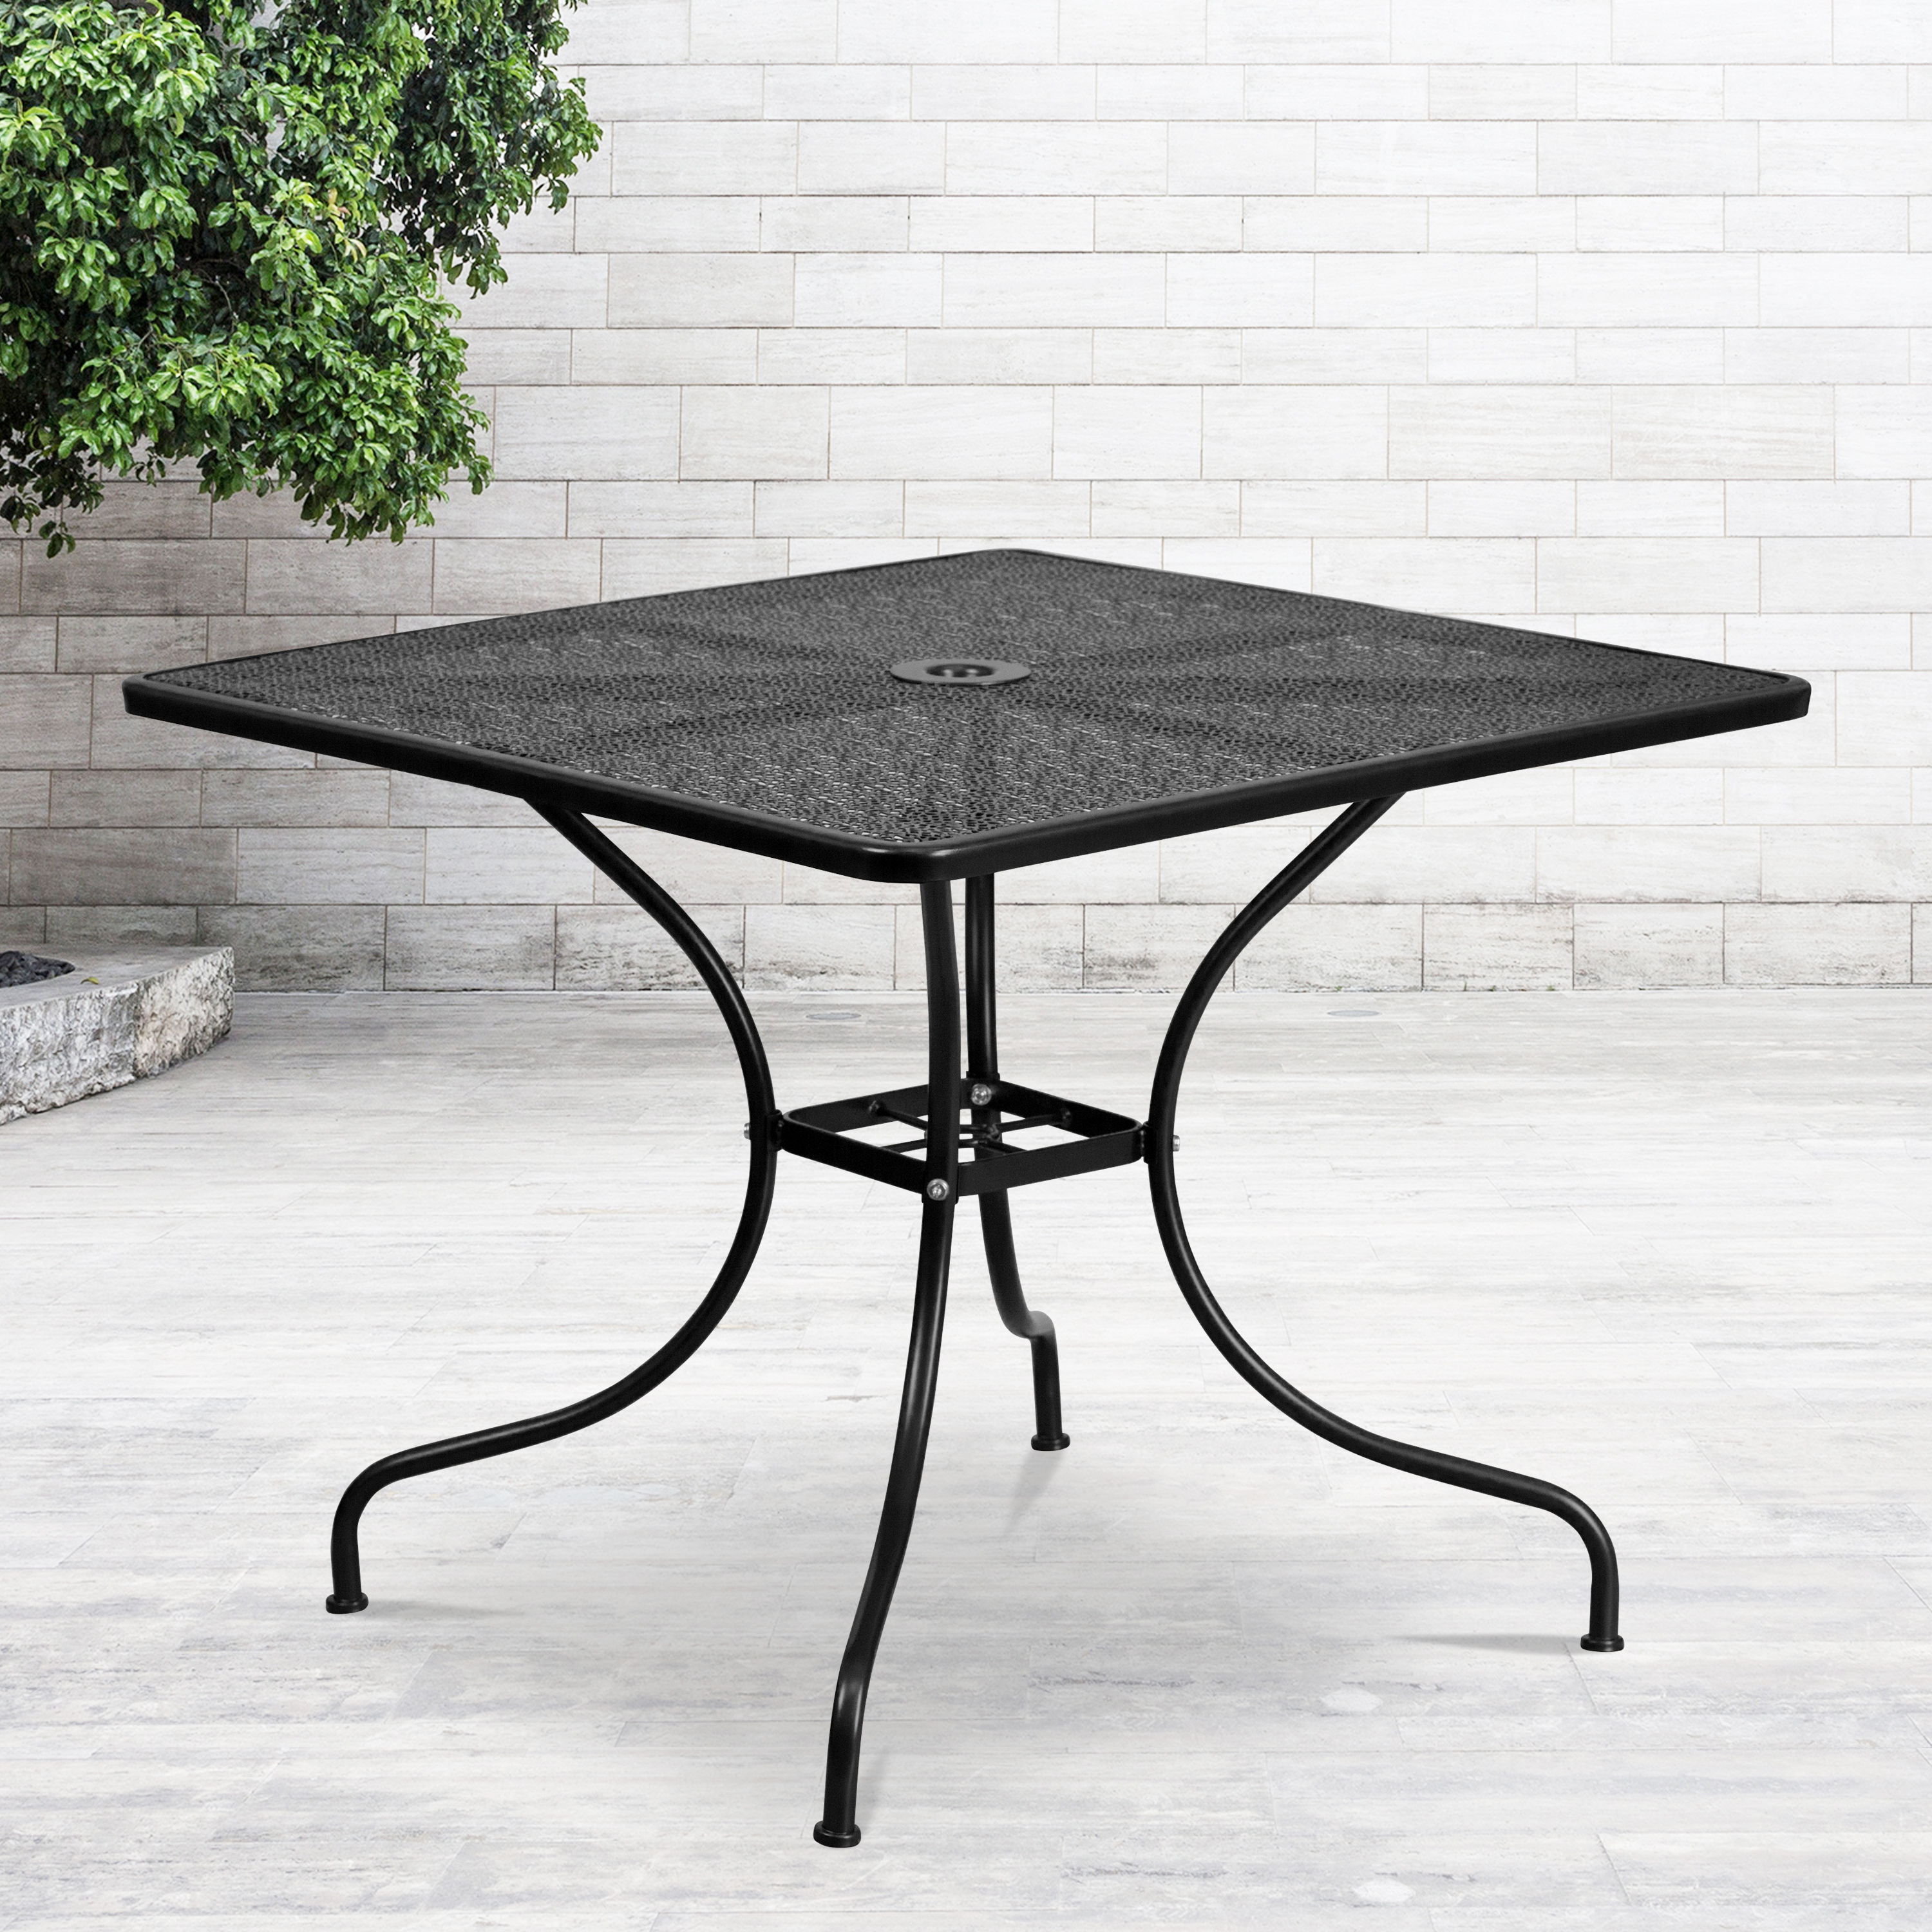 Flash Furniture Commercial Grade 35.5" Square Black Indoor-Outdoor Steel Patio Table with Umbrella Hole - image 1 of 11